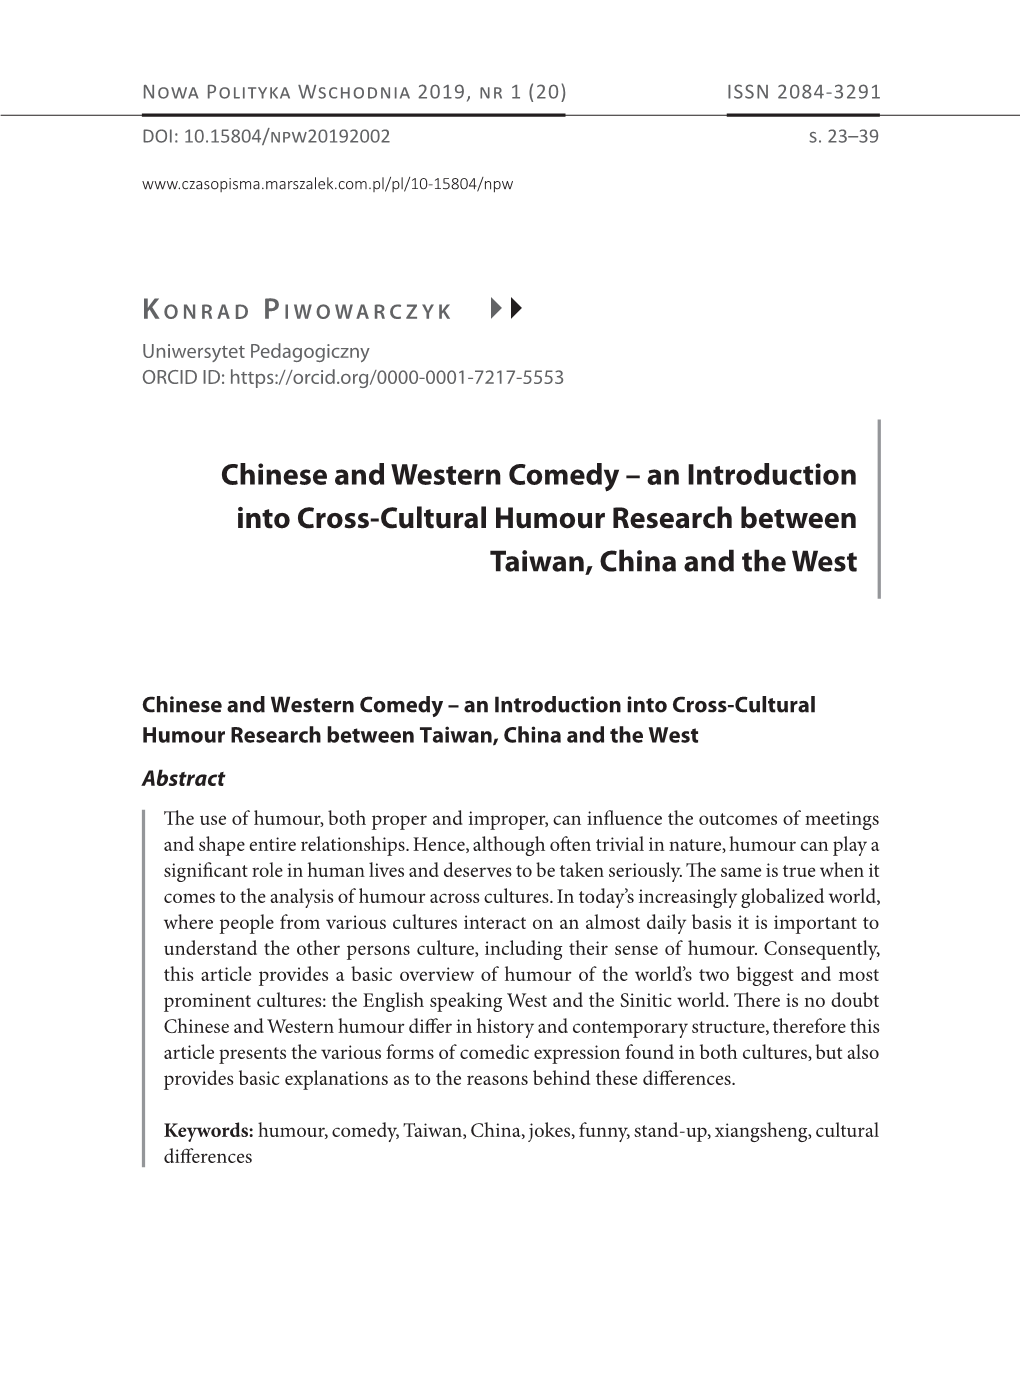 Chinese and Western Comedy – an Introduction Into Cross-Cultural Humour Research Between Taiwan, China and the West